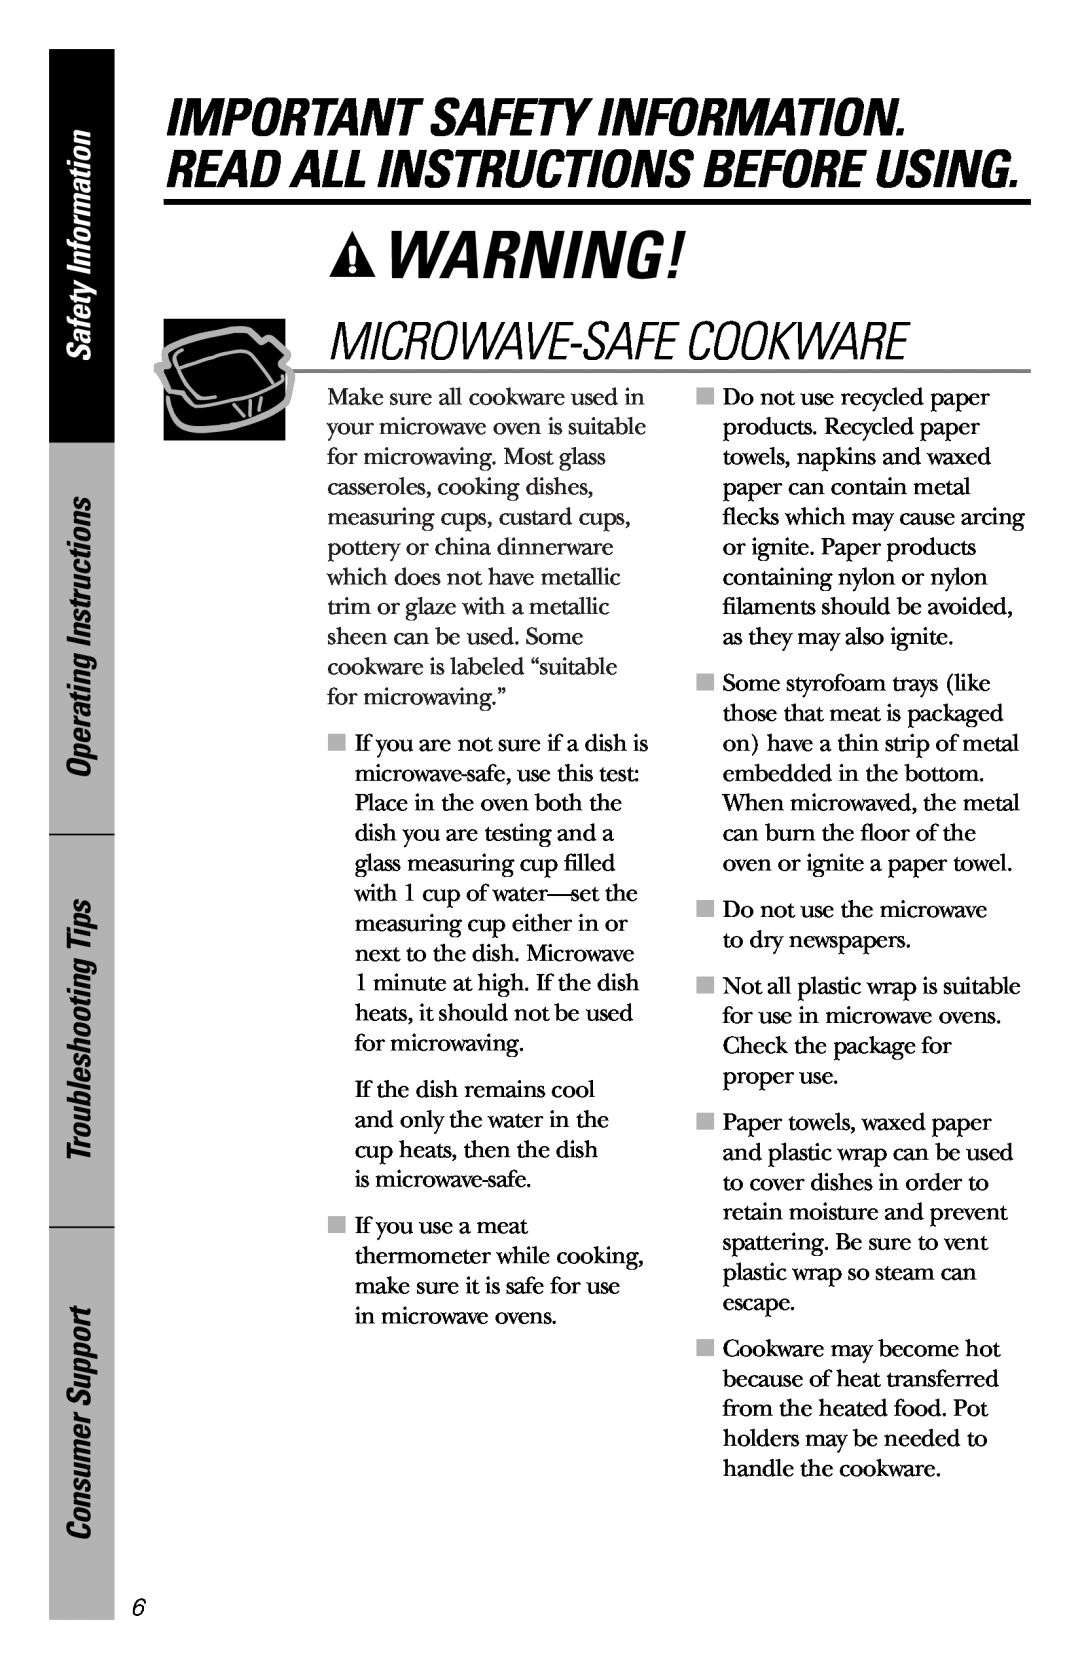 GE JES1036 Microwave-Safecookware, Safety Information, Operating Instructions Troubleshooting Tips, Consumer Support 